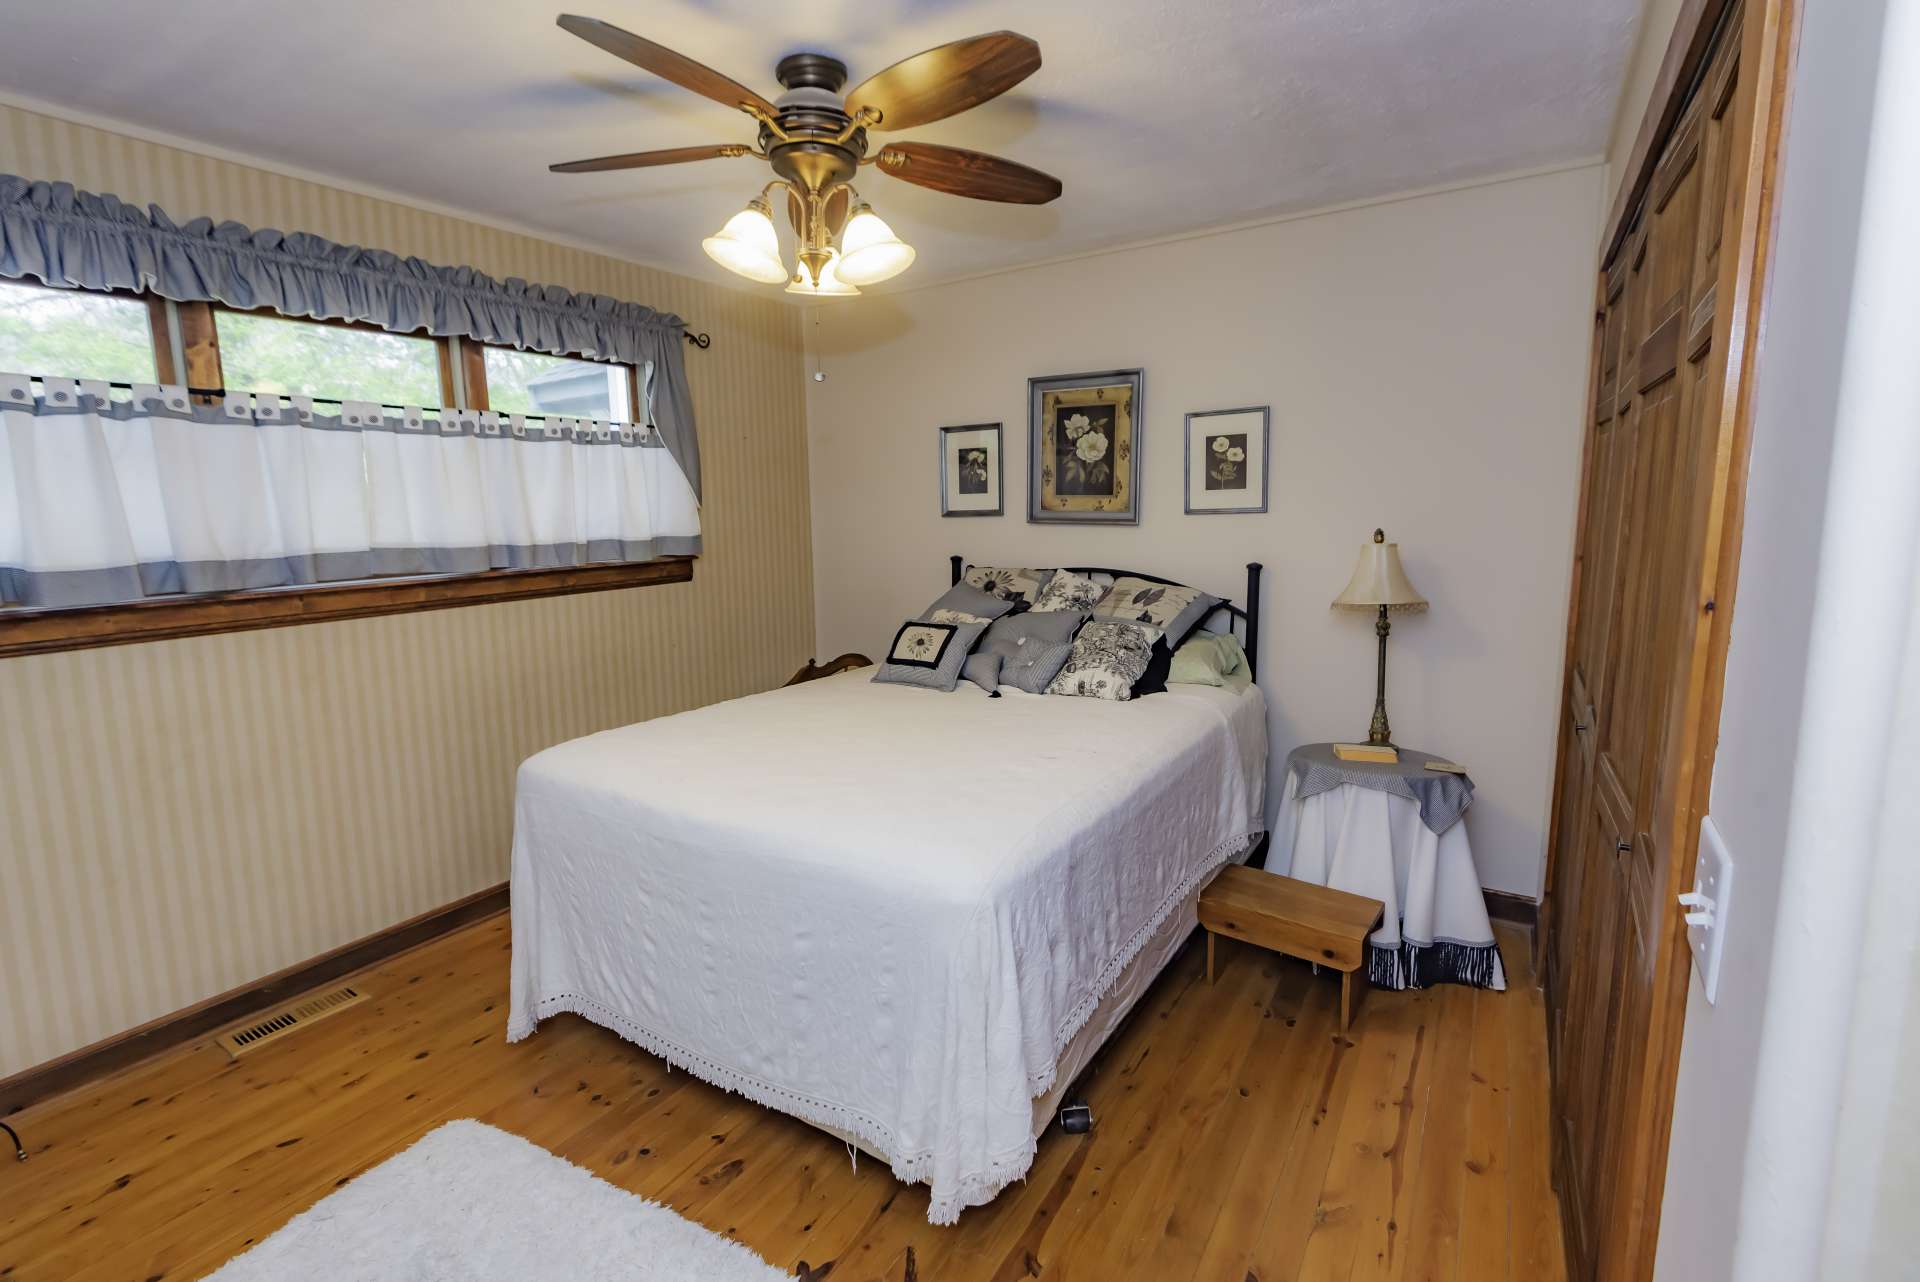 There are two generously sized guest bedrooms and a full bath on the main level, as well.